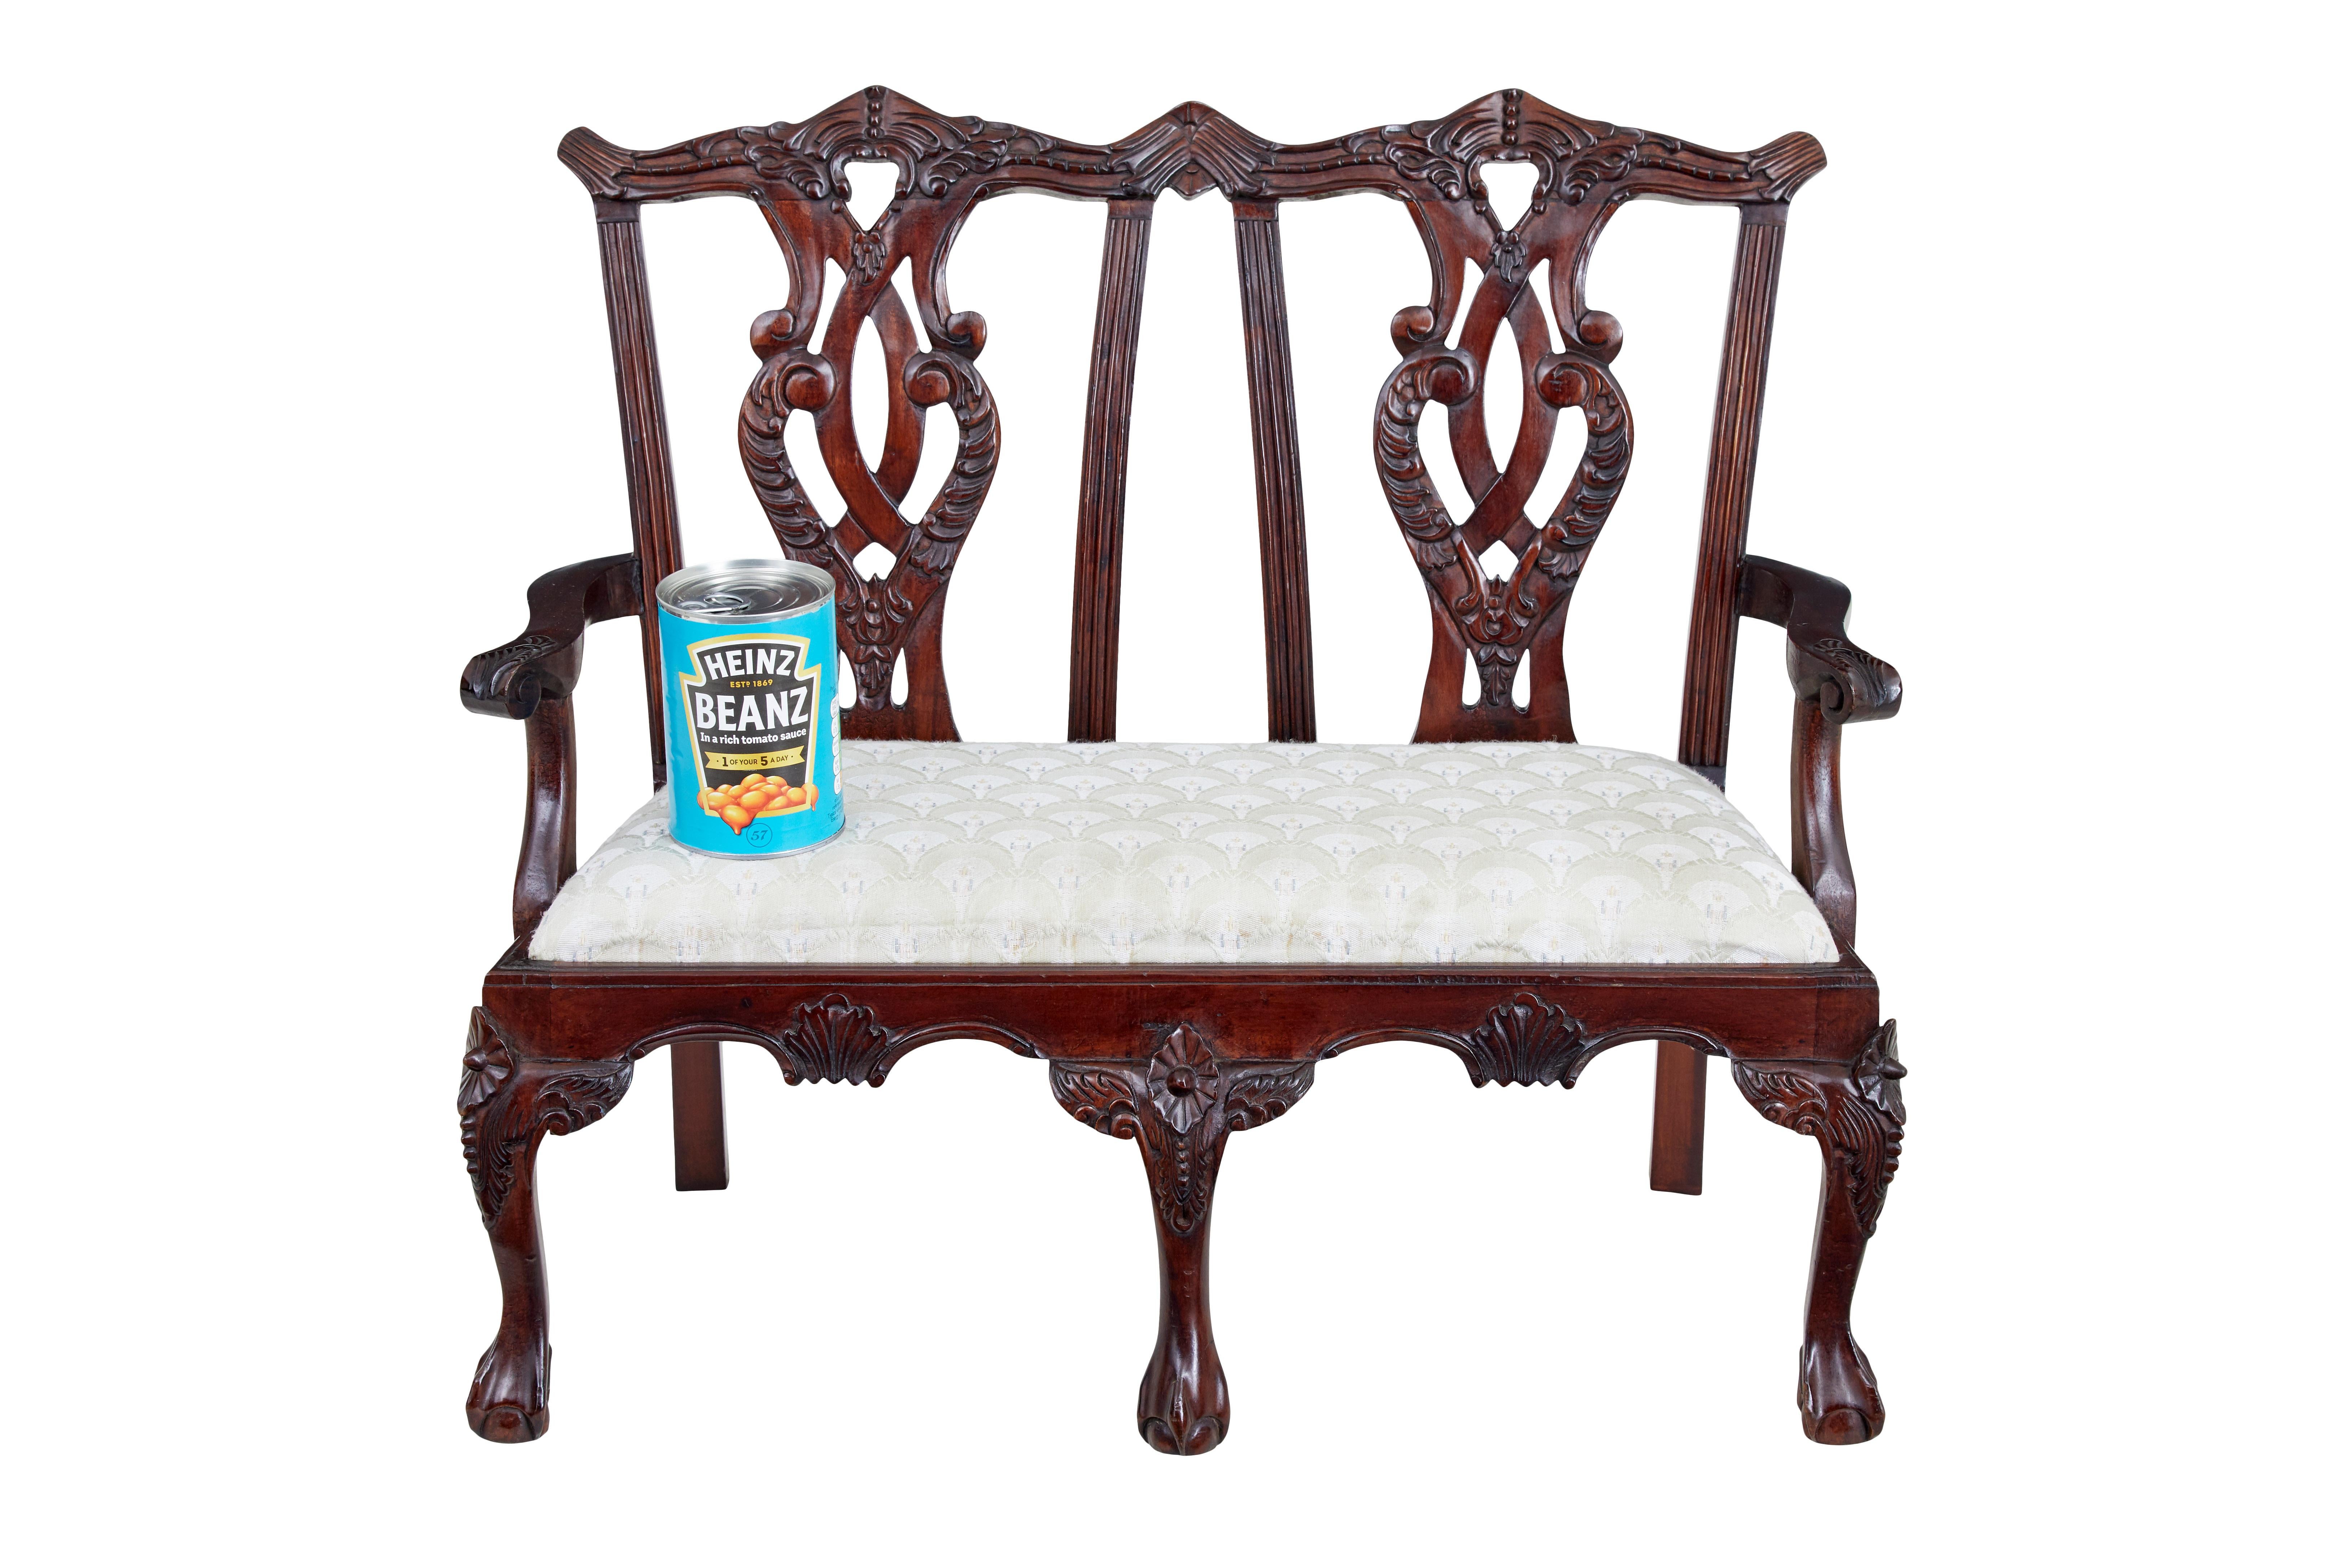 Hand carved Chippendale influenced miniature 2 seat chair circa 1990.

Here we have a fine example of a well known Chippendale design double seated chair.  Well carved in fruitwood showing all detailed carving, all presented in this scale.  This